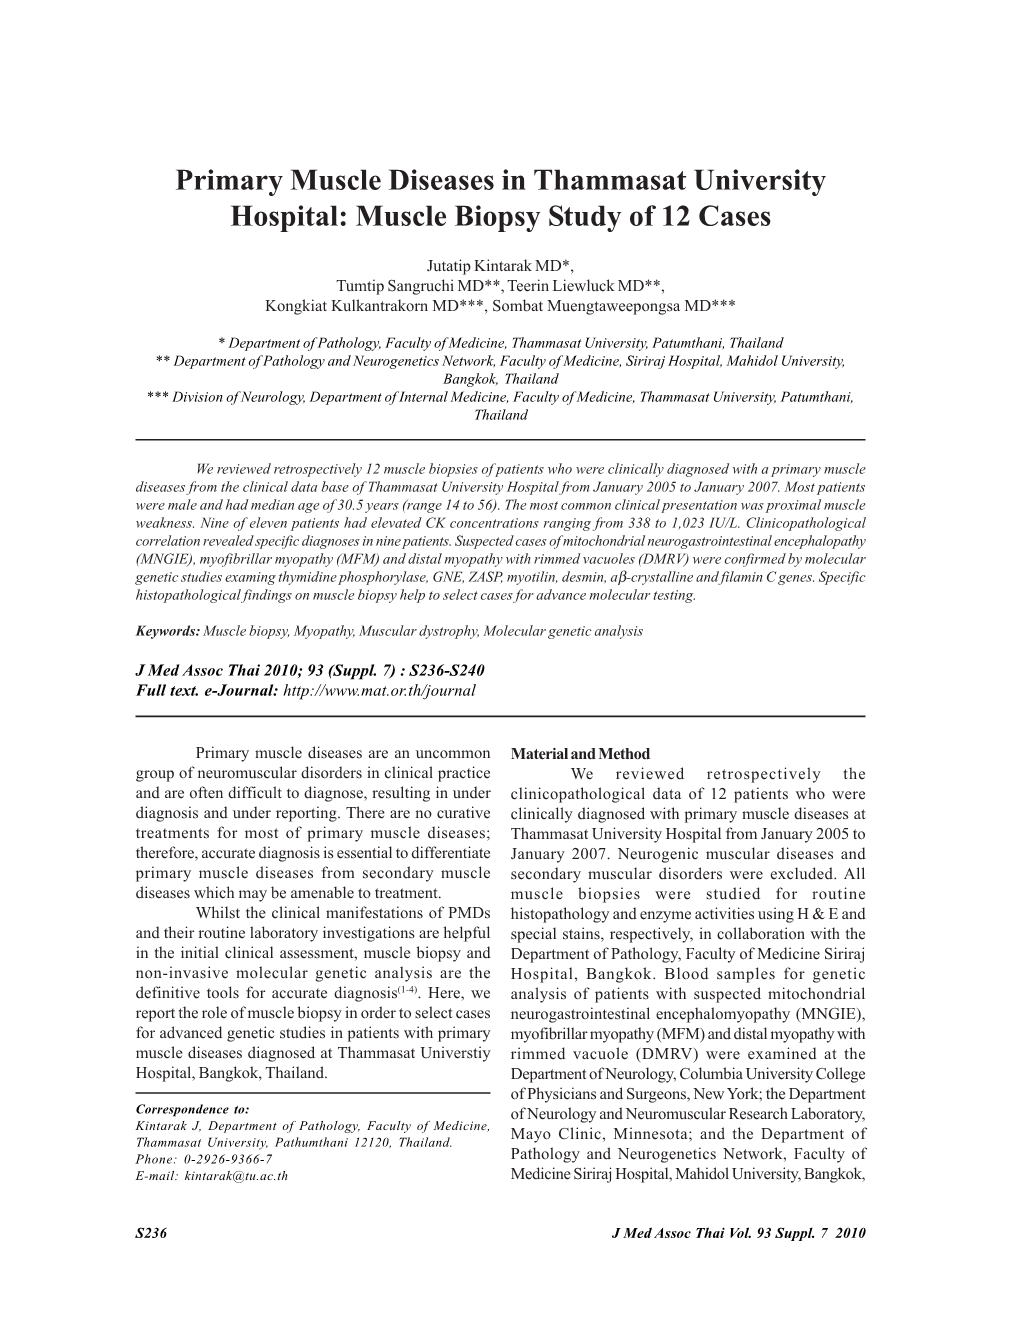 Primary Muscle Diseases in Thammasat University Hospital: Muscle Biopsy Study of 12 Cases